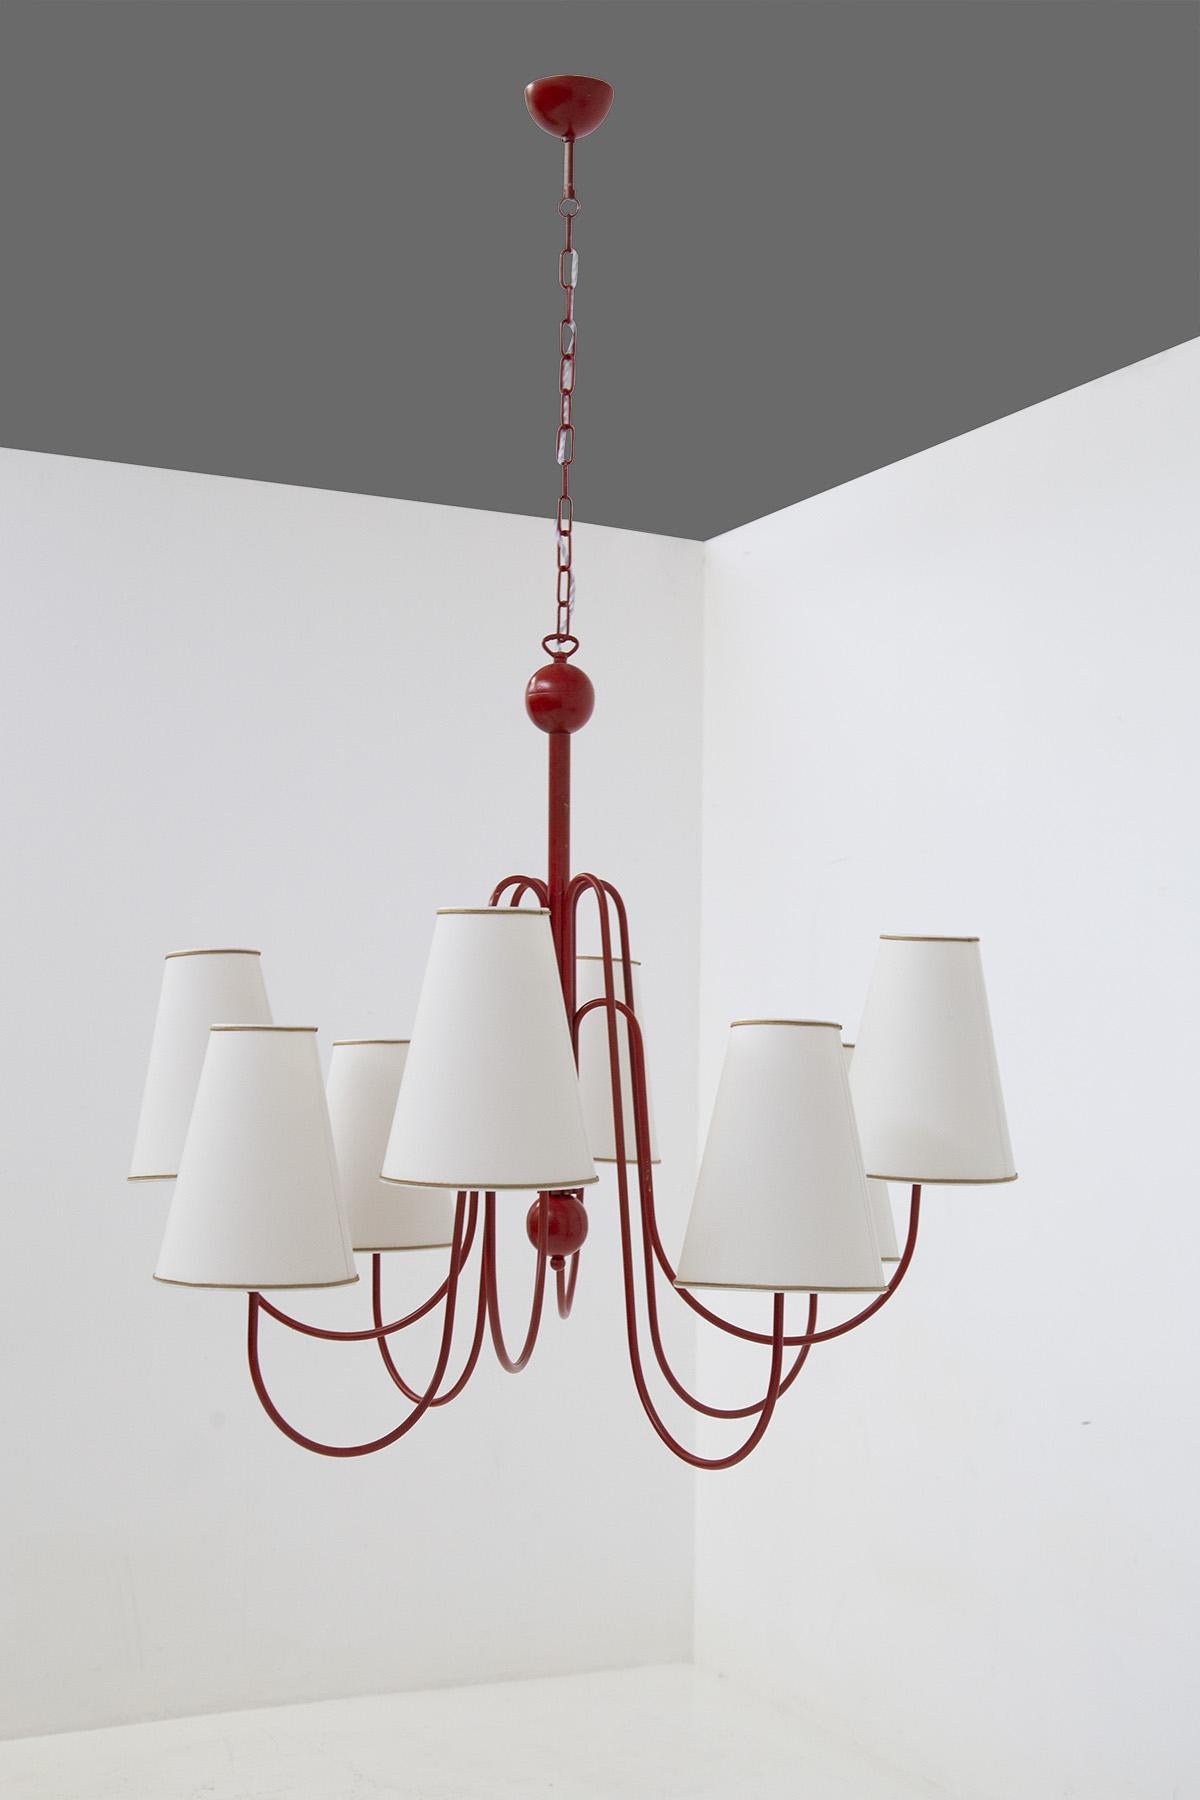 Beautiful vintage 1950s style chandelier made of painted brass and cotton.
The chandelier is made of red painted brass with 8 very curvy and long supports starting from the center of the chandelier. Note its sinuous lines that accompany the hat